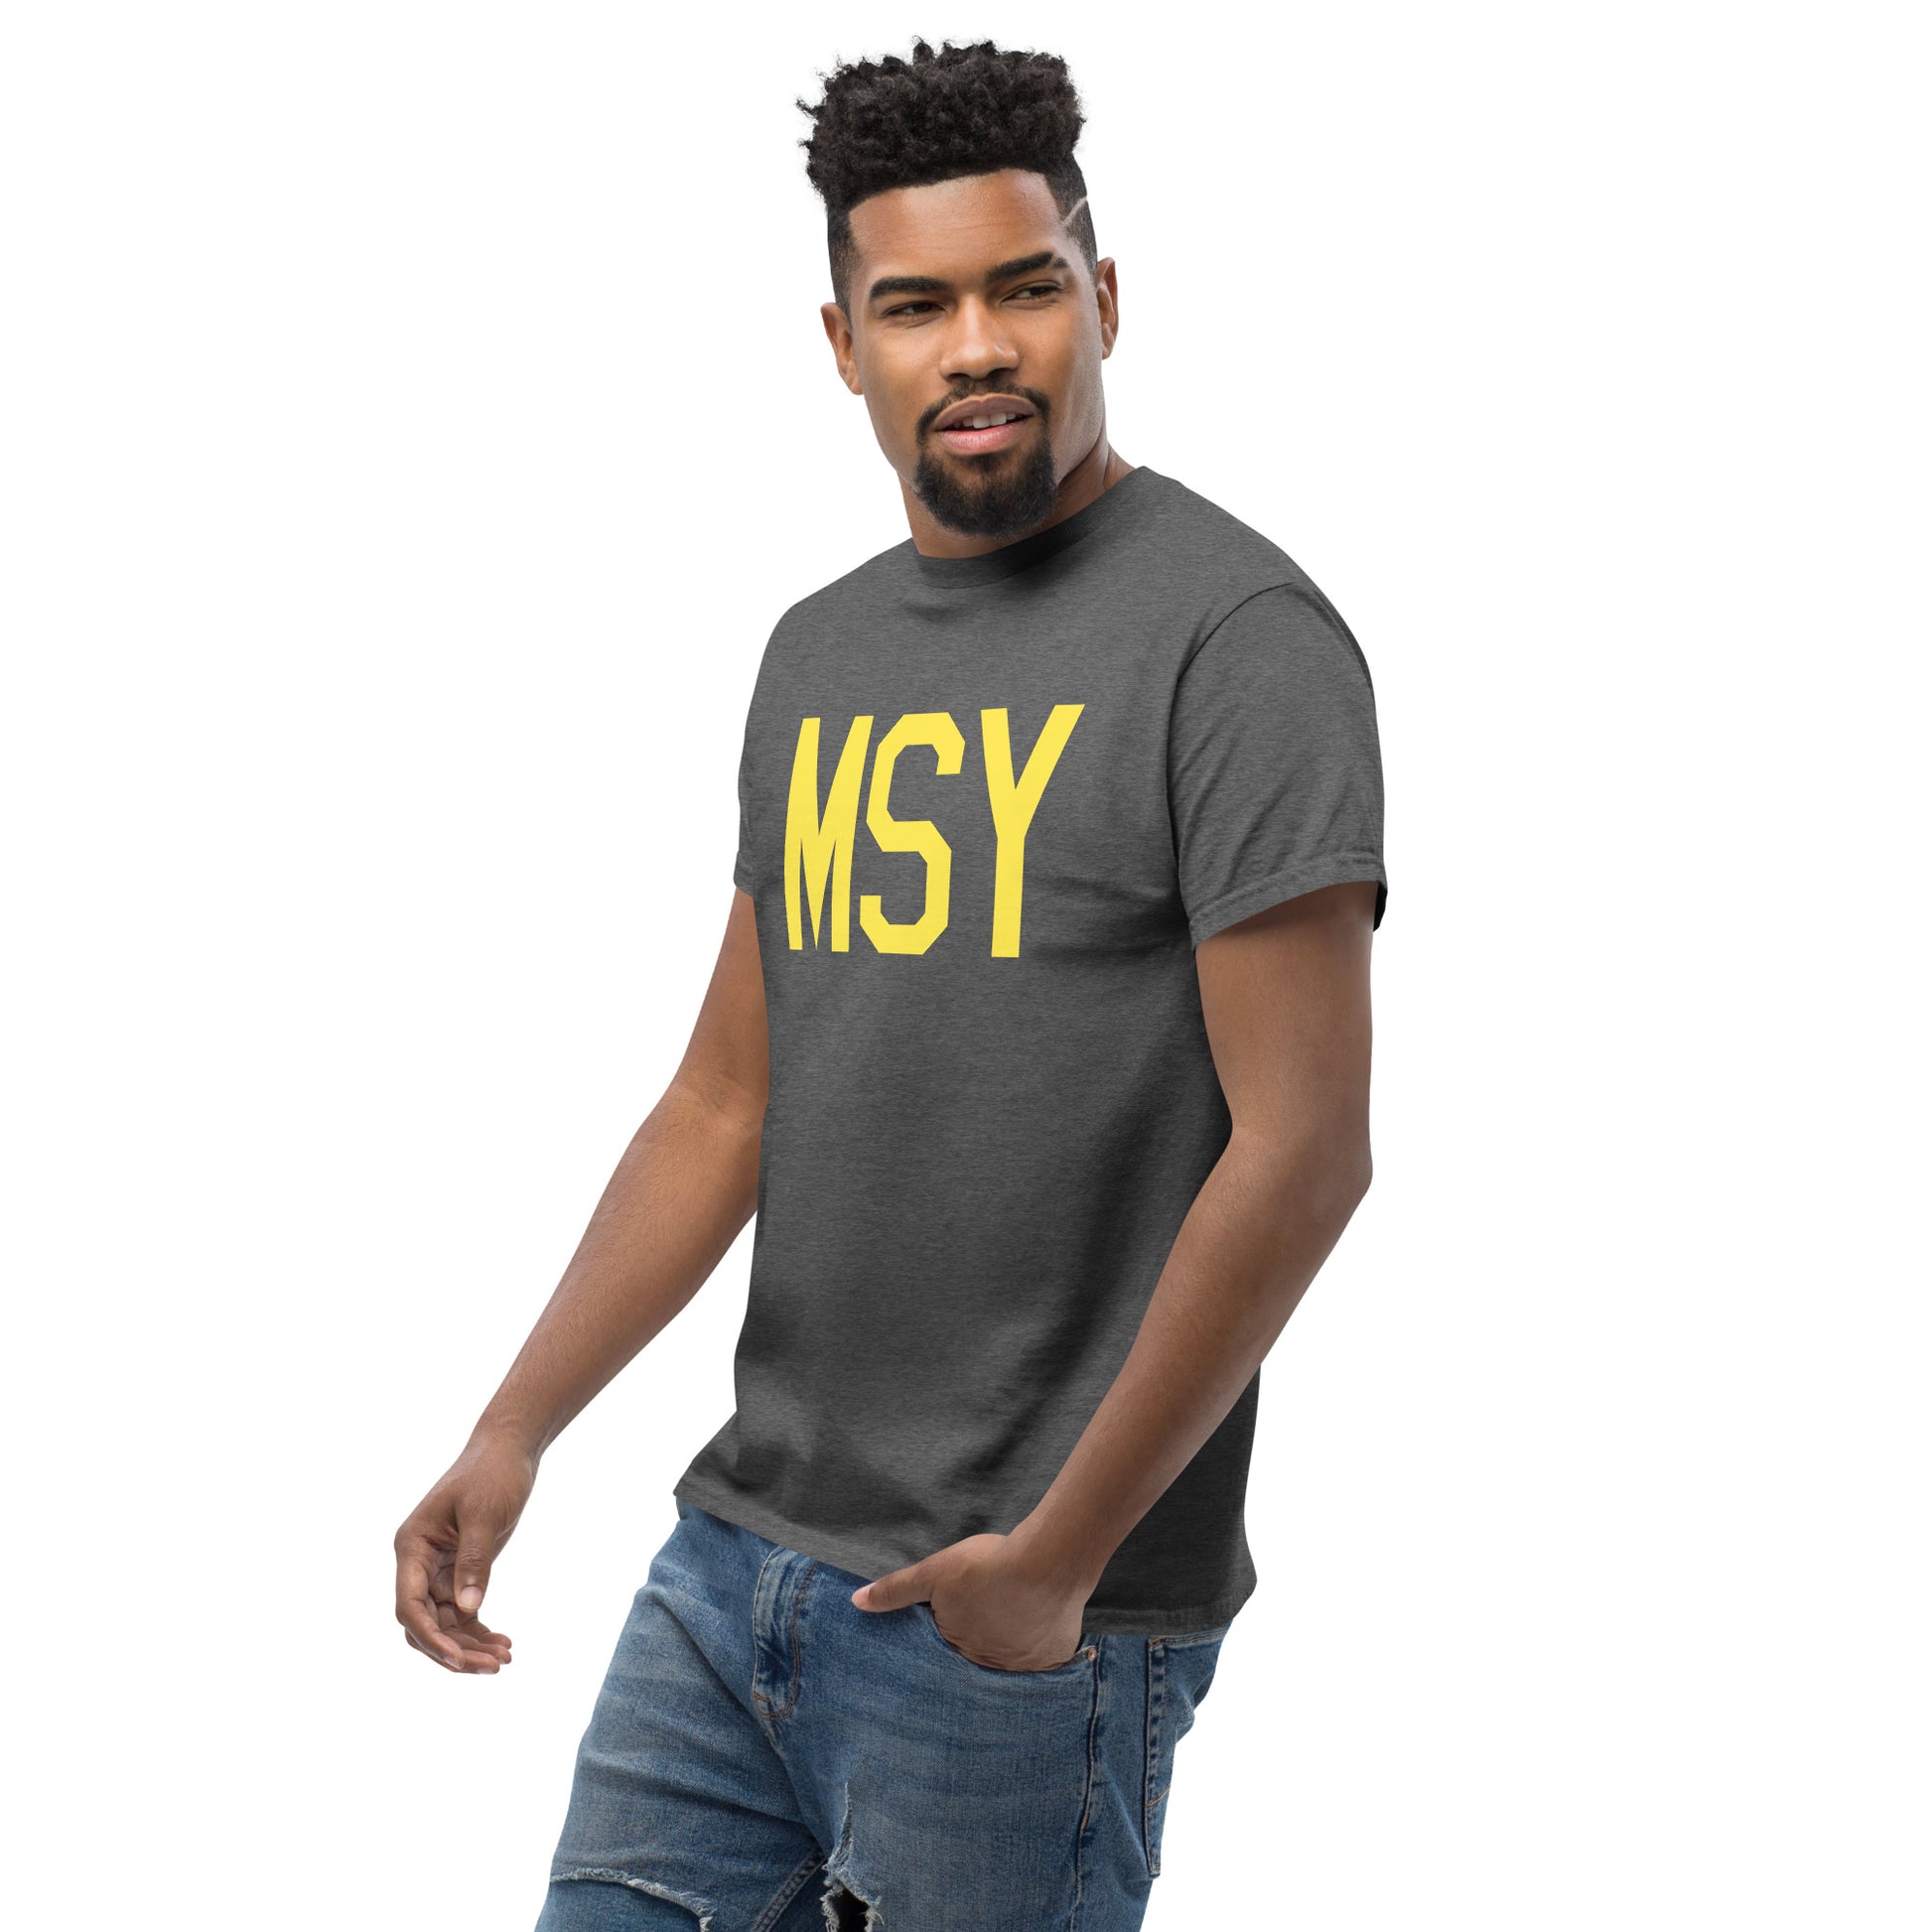 Aviation-Theme Men's T-Shirt - Yellow Graphic • MSY New Orleans • YHM Designs - Image 07